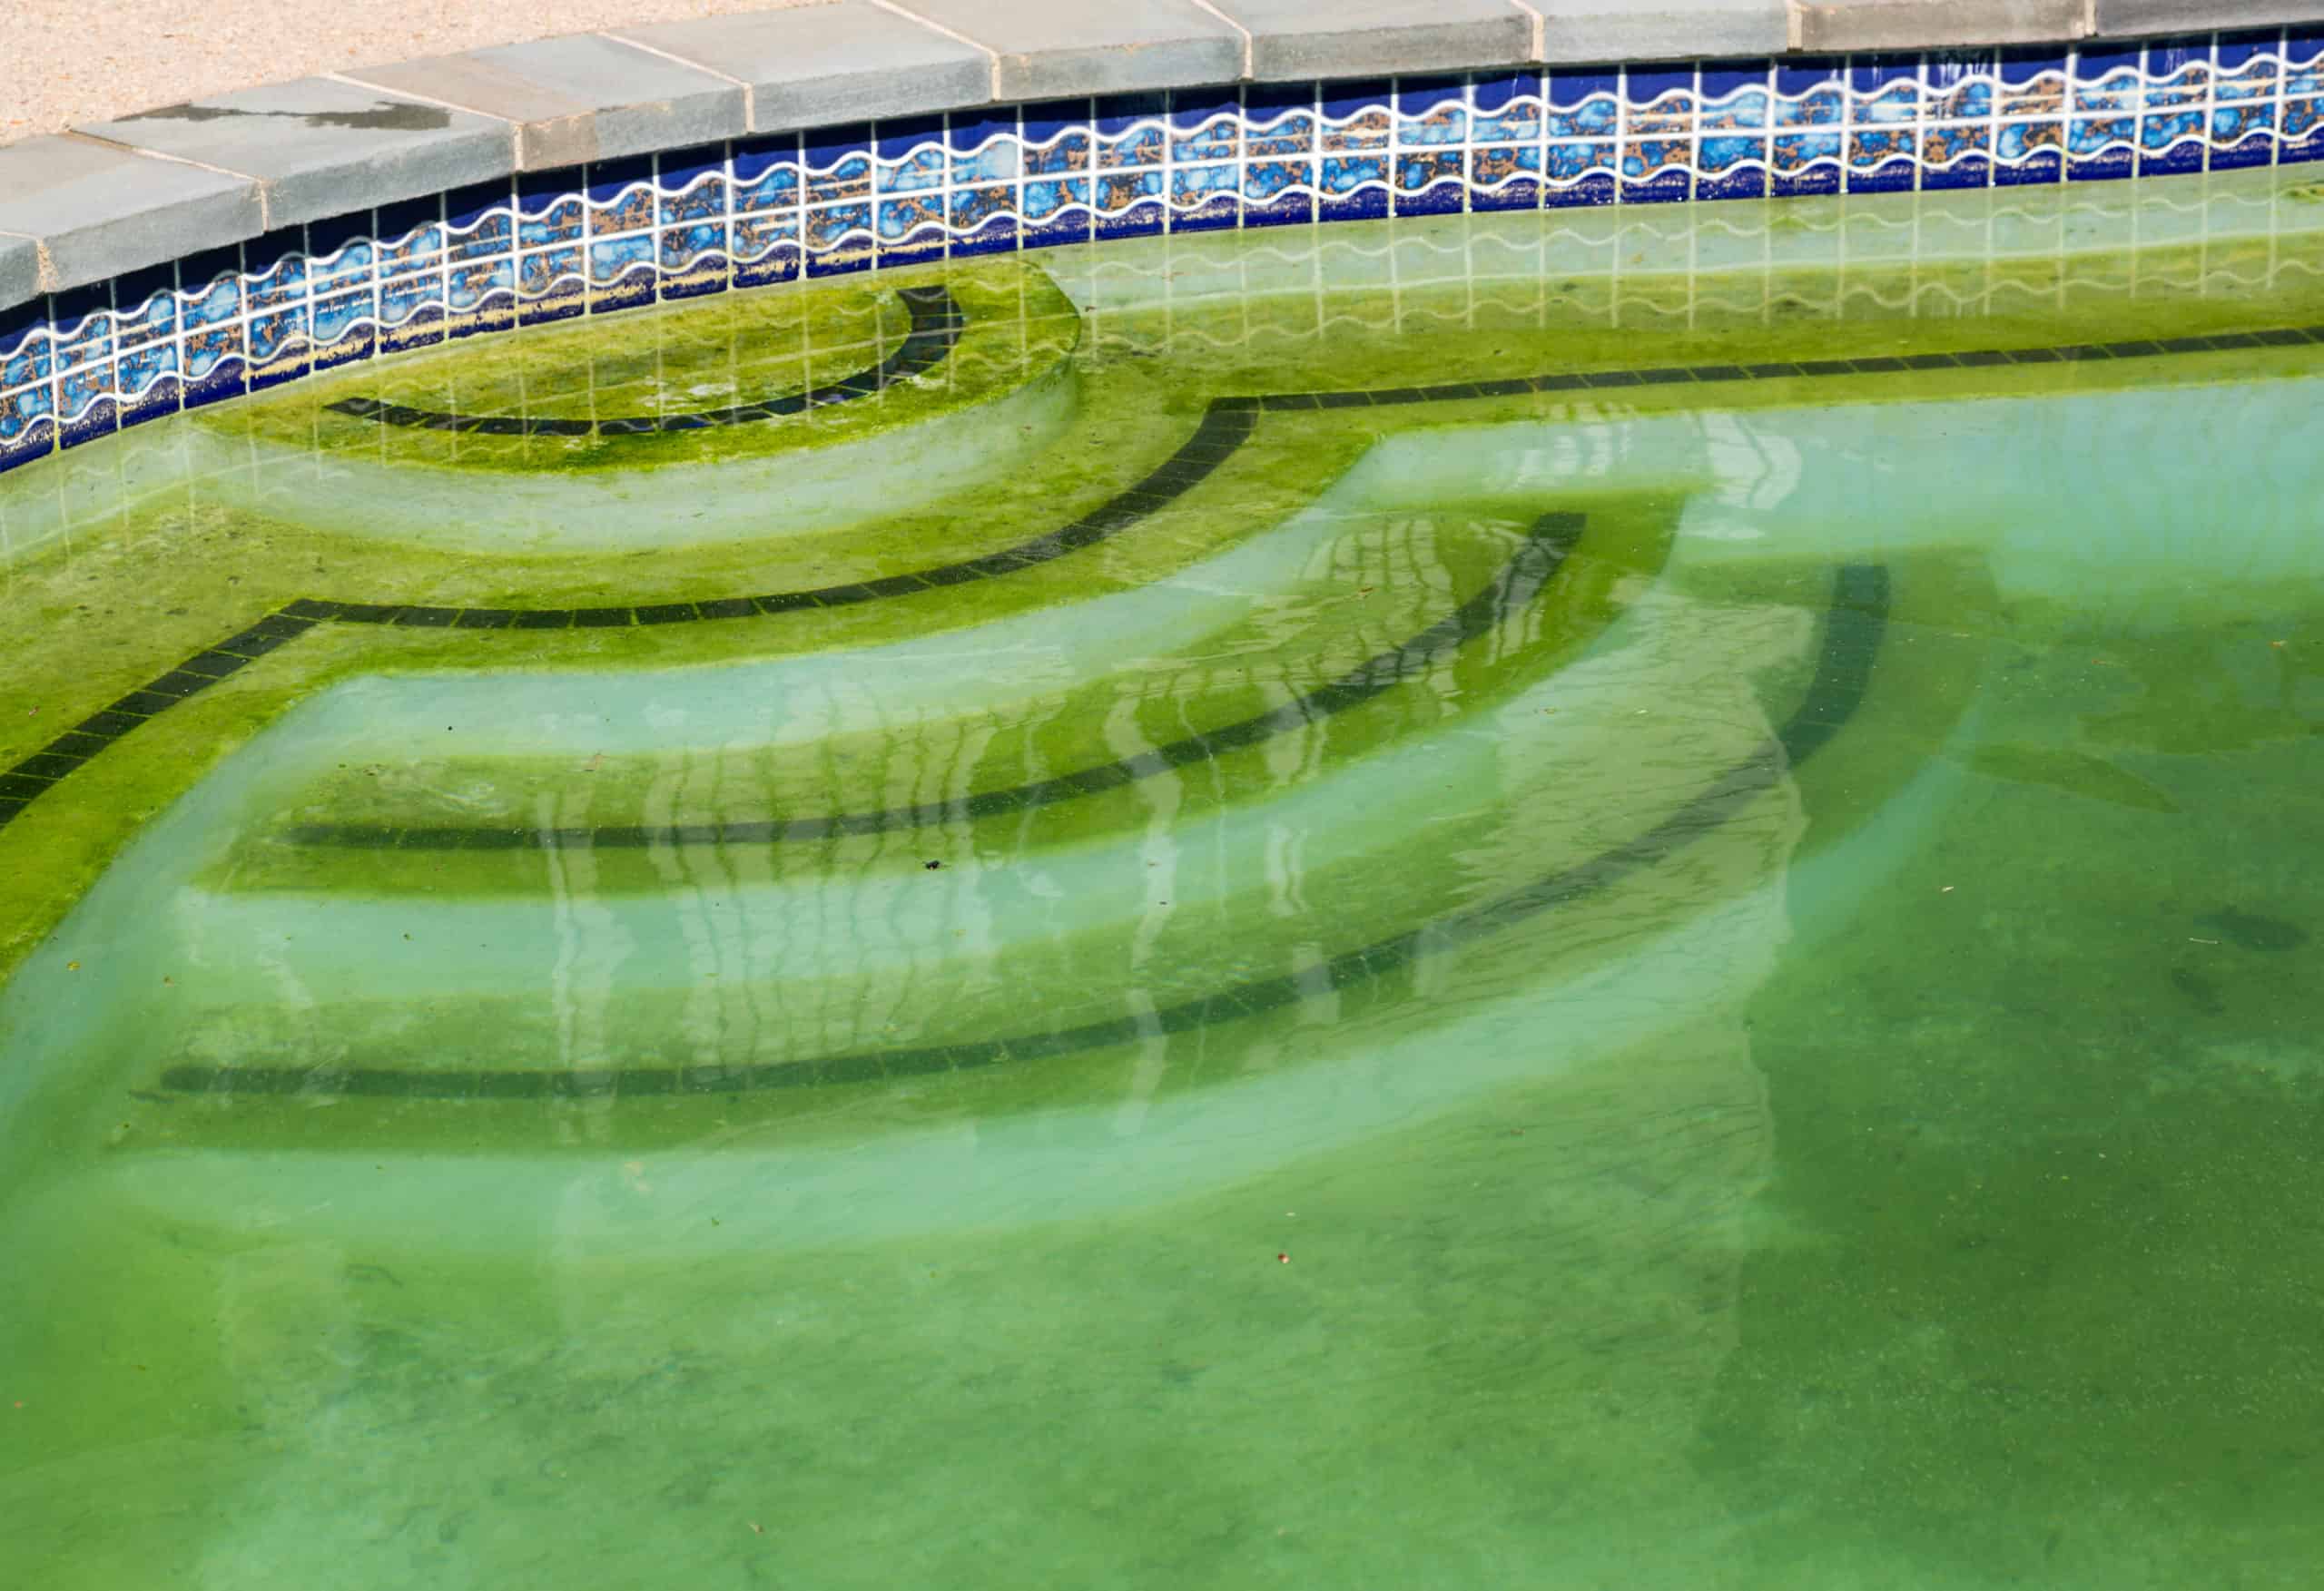 We see a swimming pool with green water. The stairs of the green pool are covered in algae.